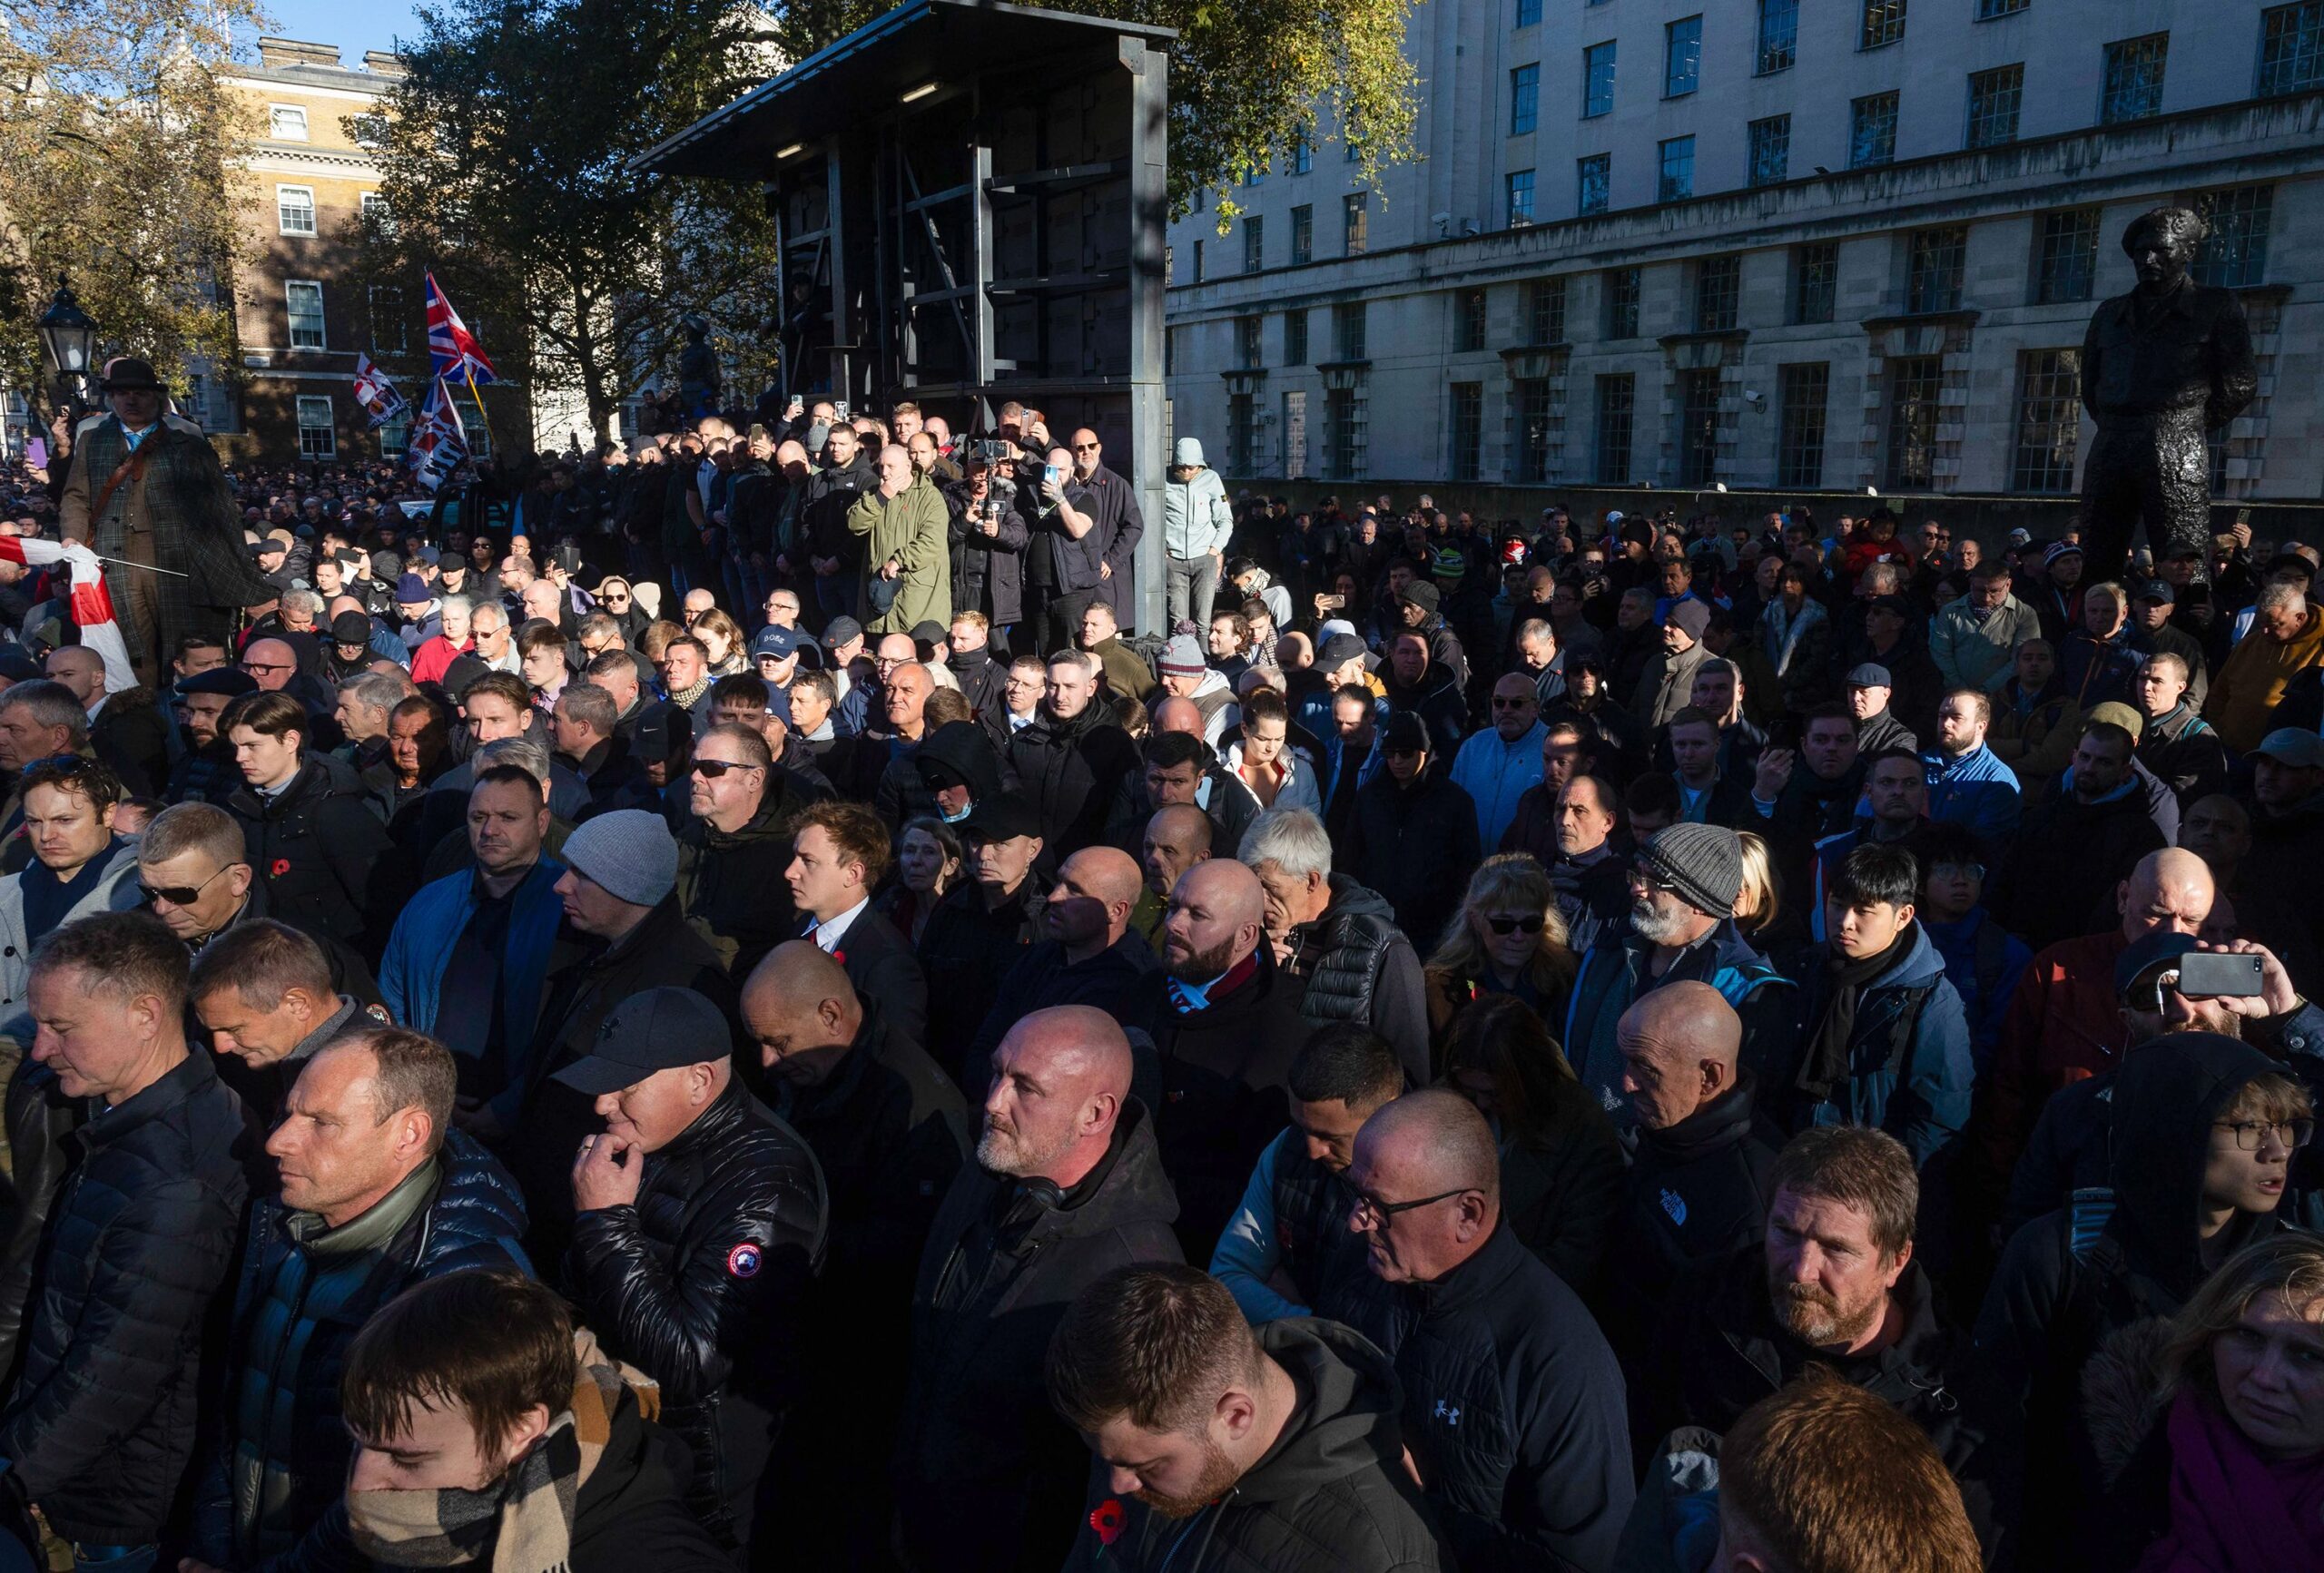 Attendees pay their respects at the Cenotaph ahead of a pro-Palestinian rally. (Carlos Jasso/Bloomb...